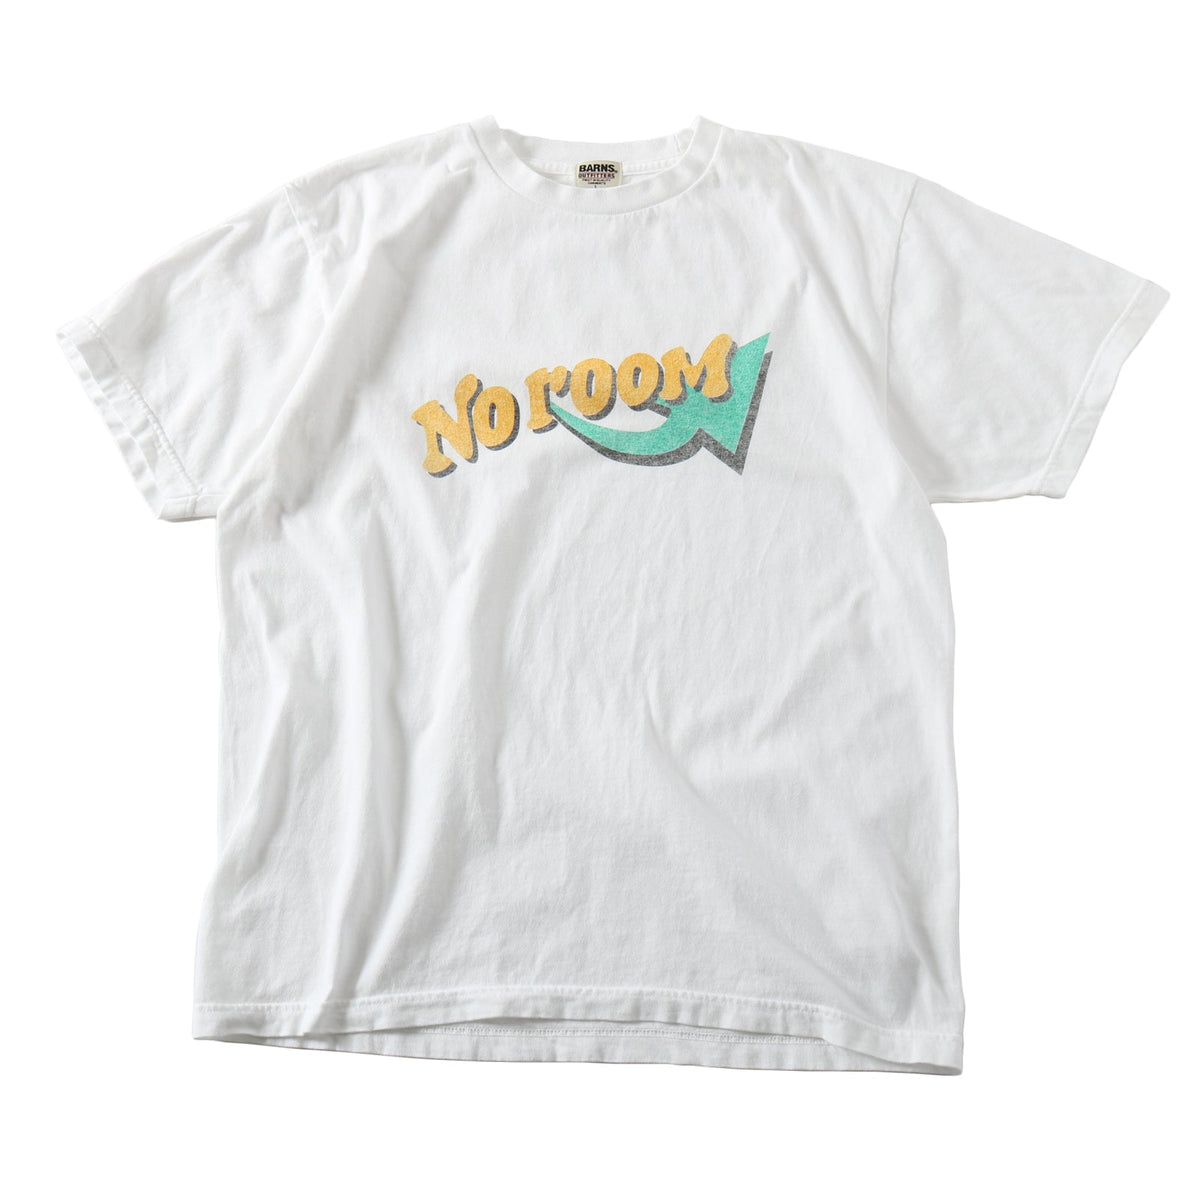 【New Series!】Re:Producter S/S T-shirt【No room】BR-24155